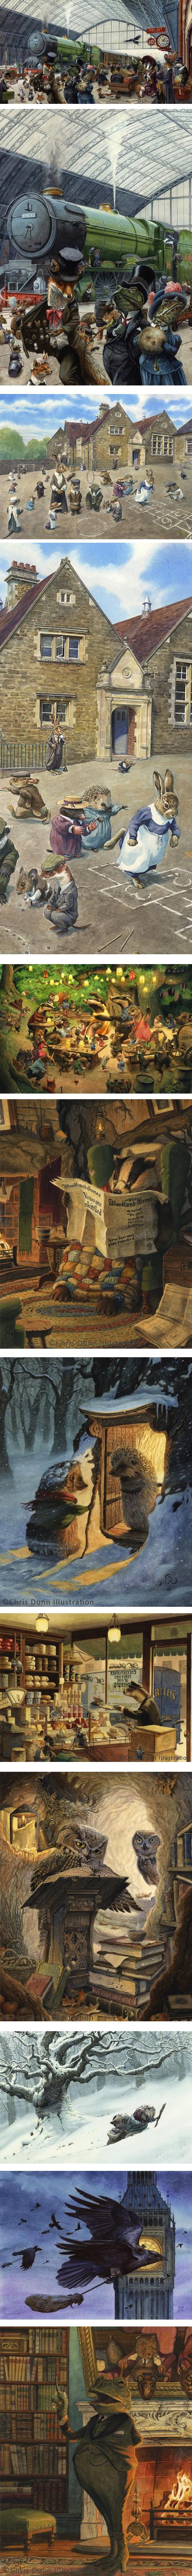 Chris Dunn, illustration, Wind in the Willows